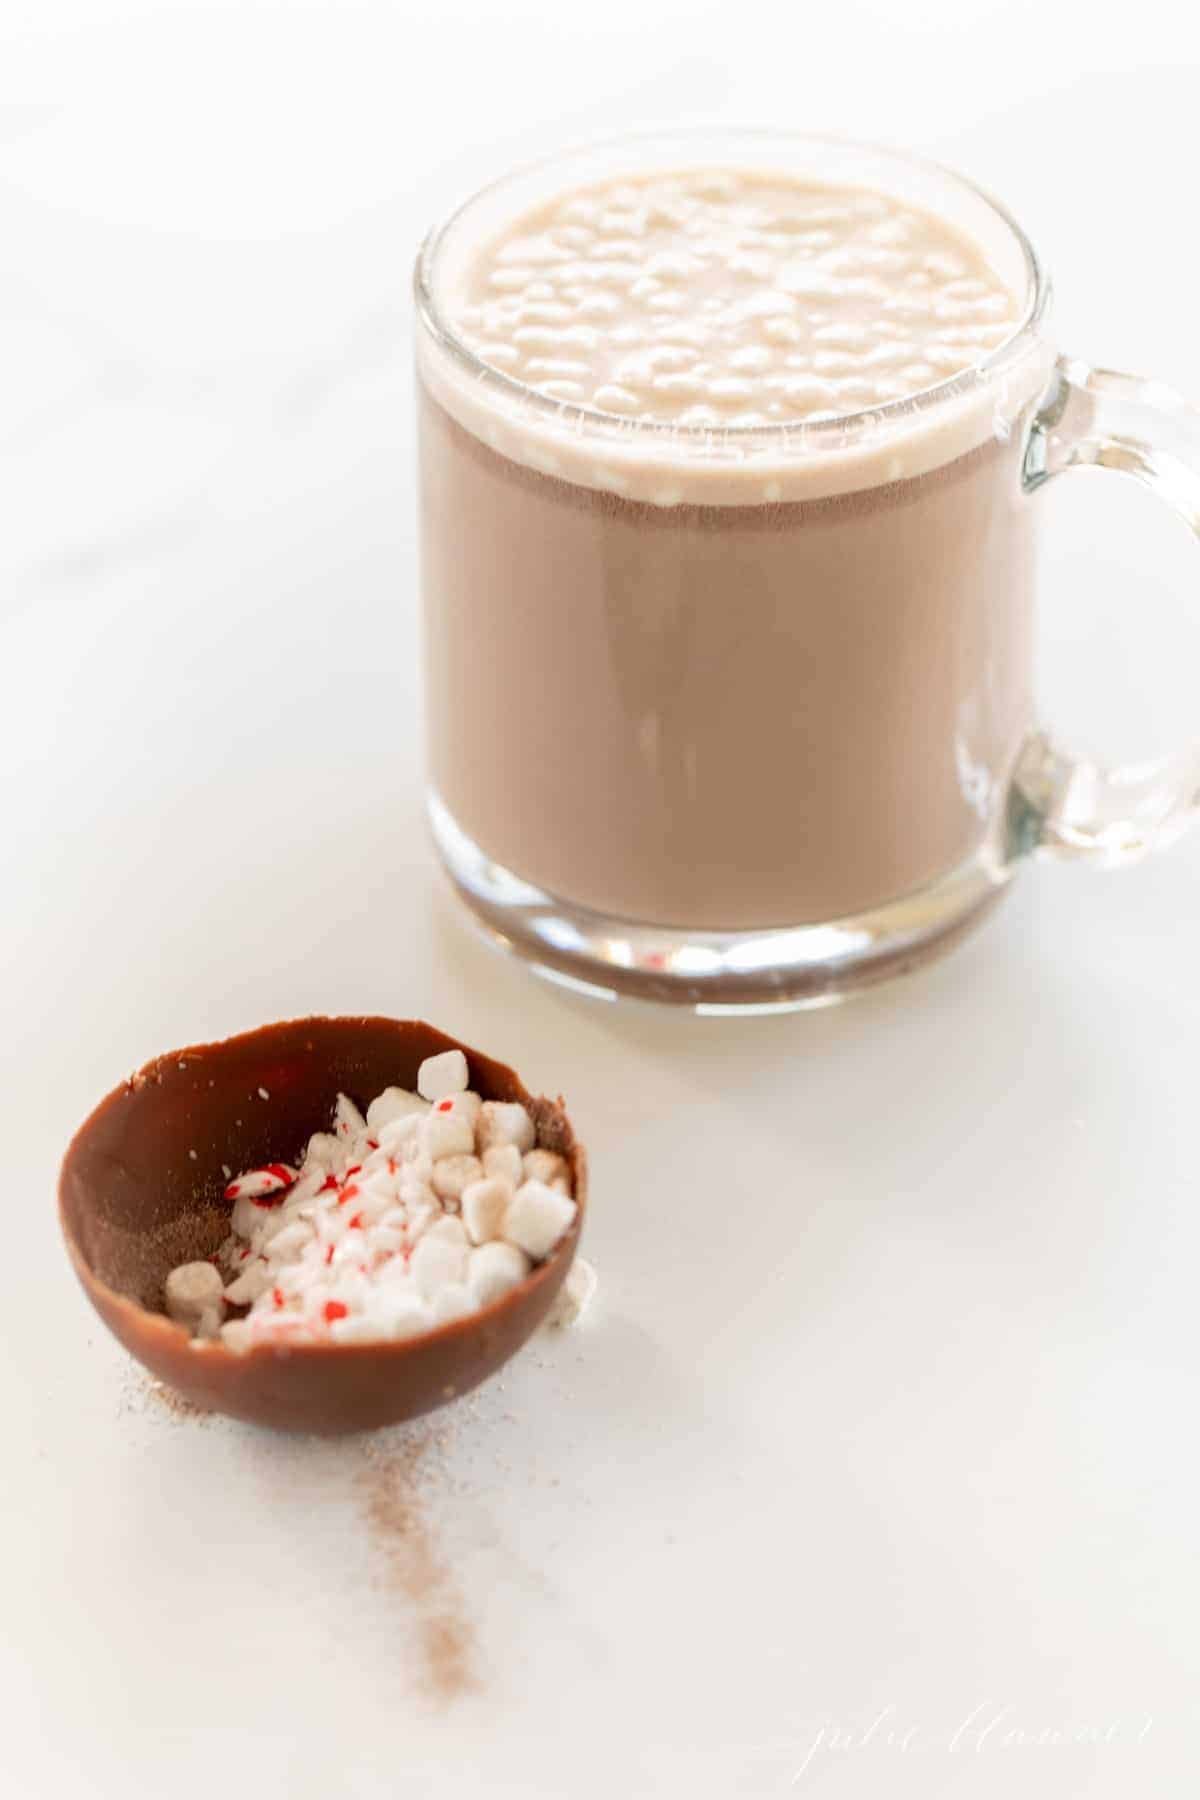 A clear glass mug full of hot chocolate with half a sphere of a hot chocolate bomb in the foreground.